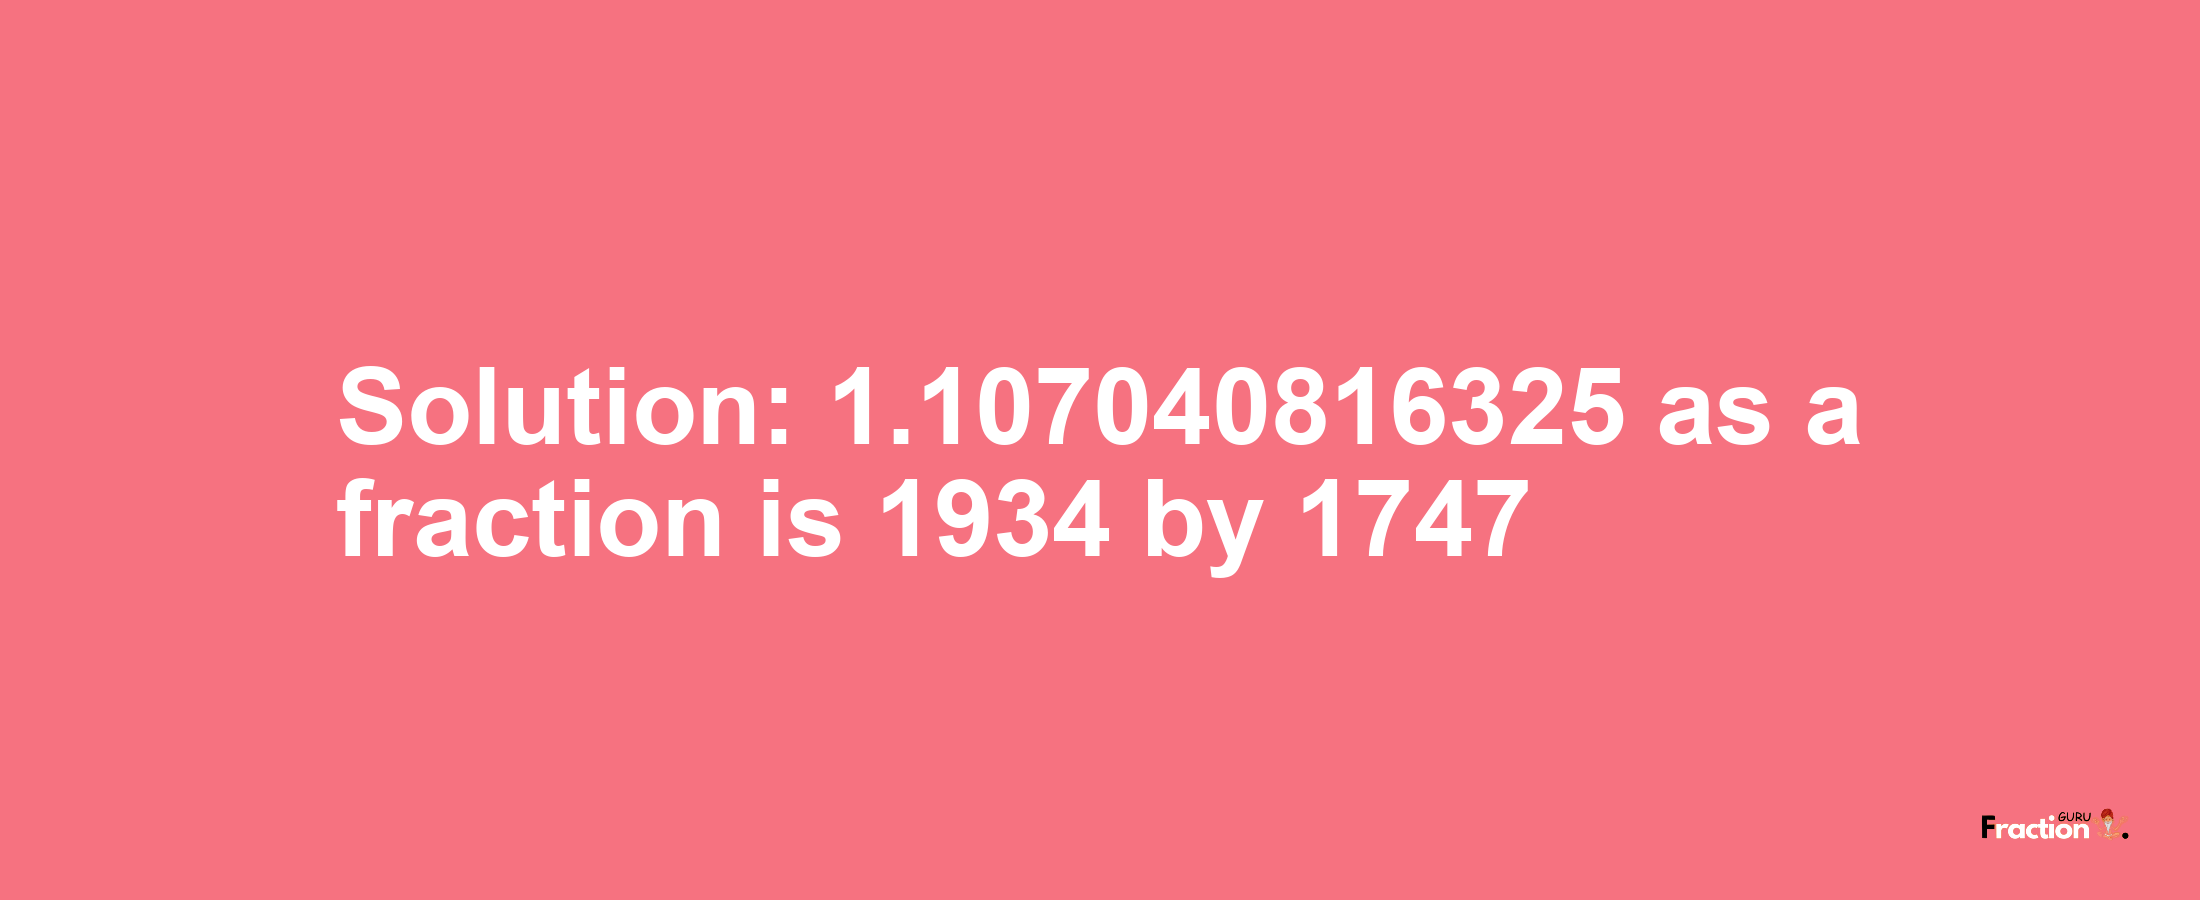 Solution:1.107040816325 as a fraction is 1934/1747